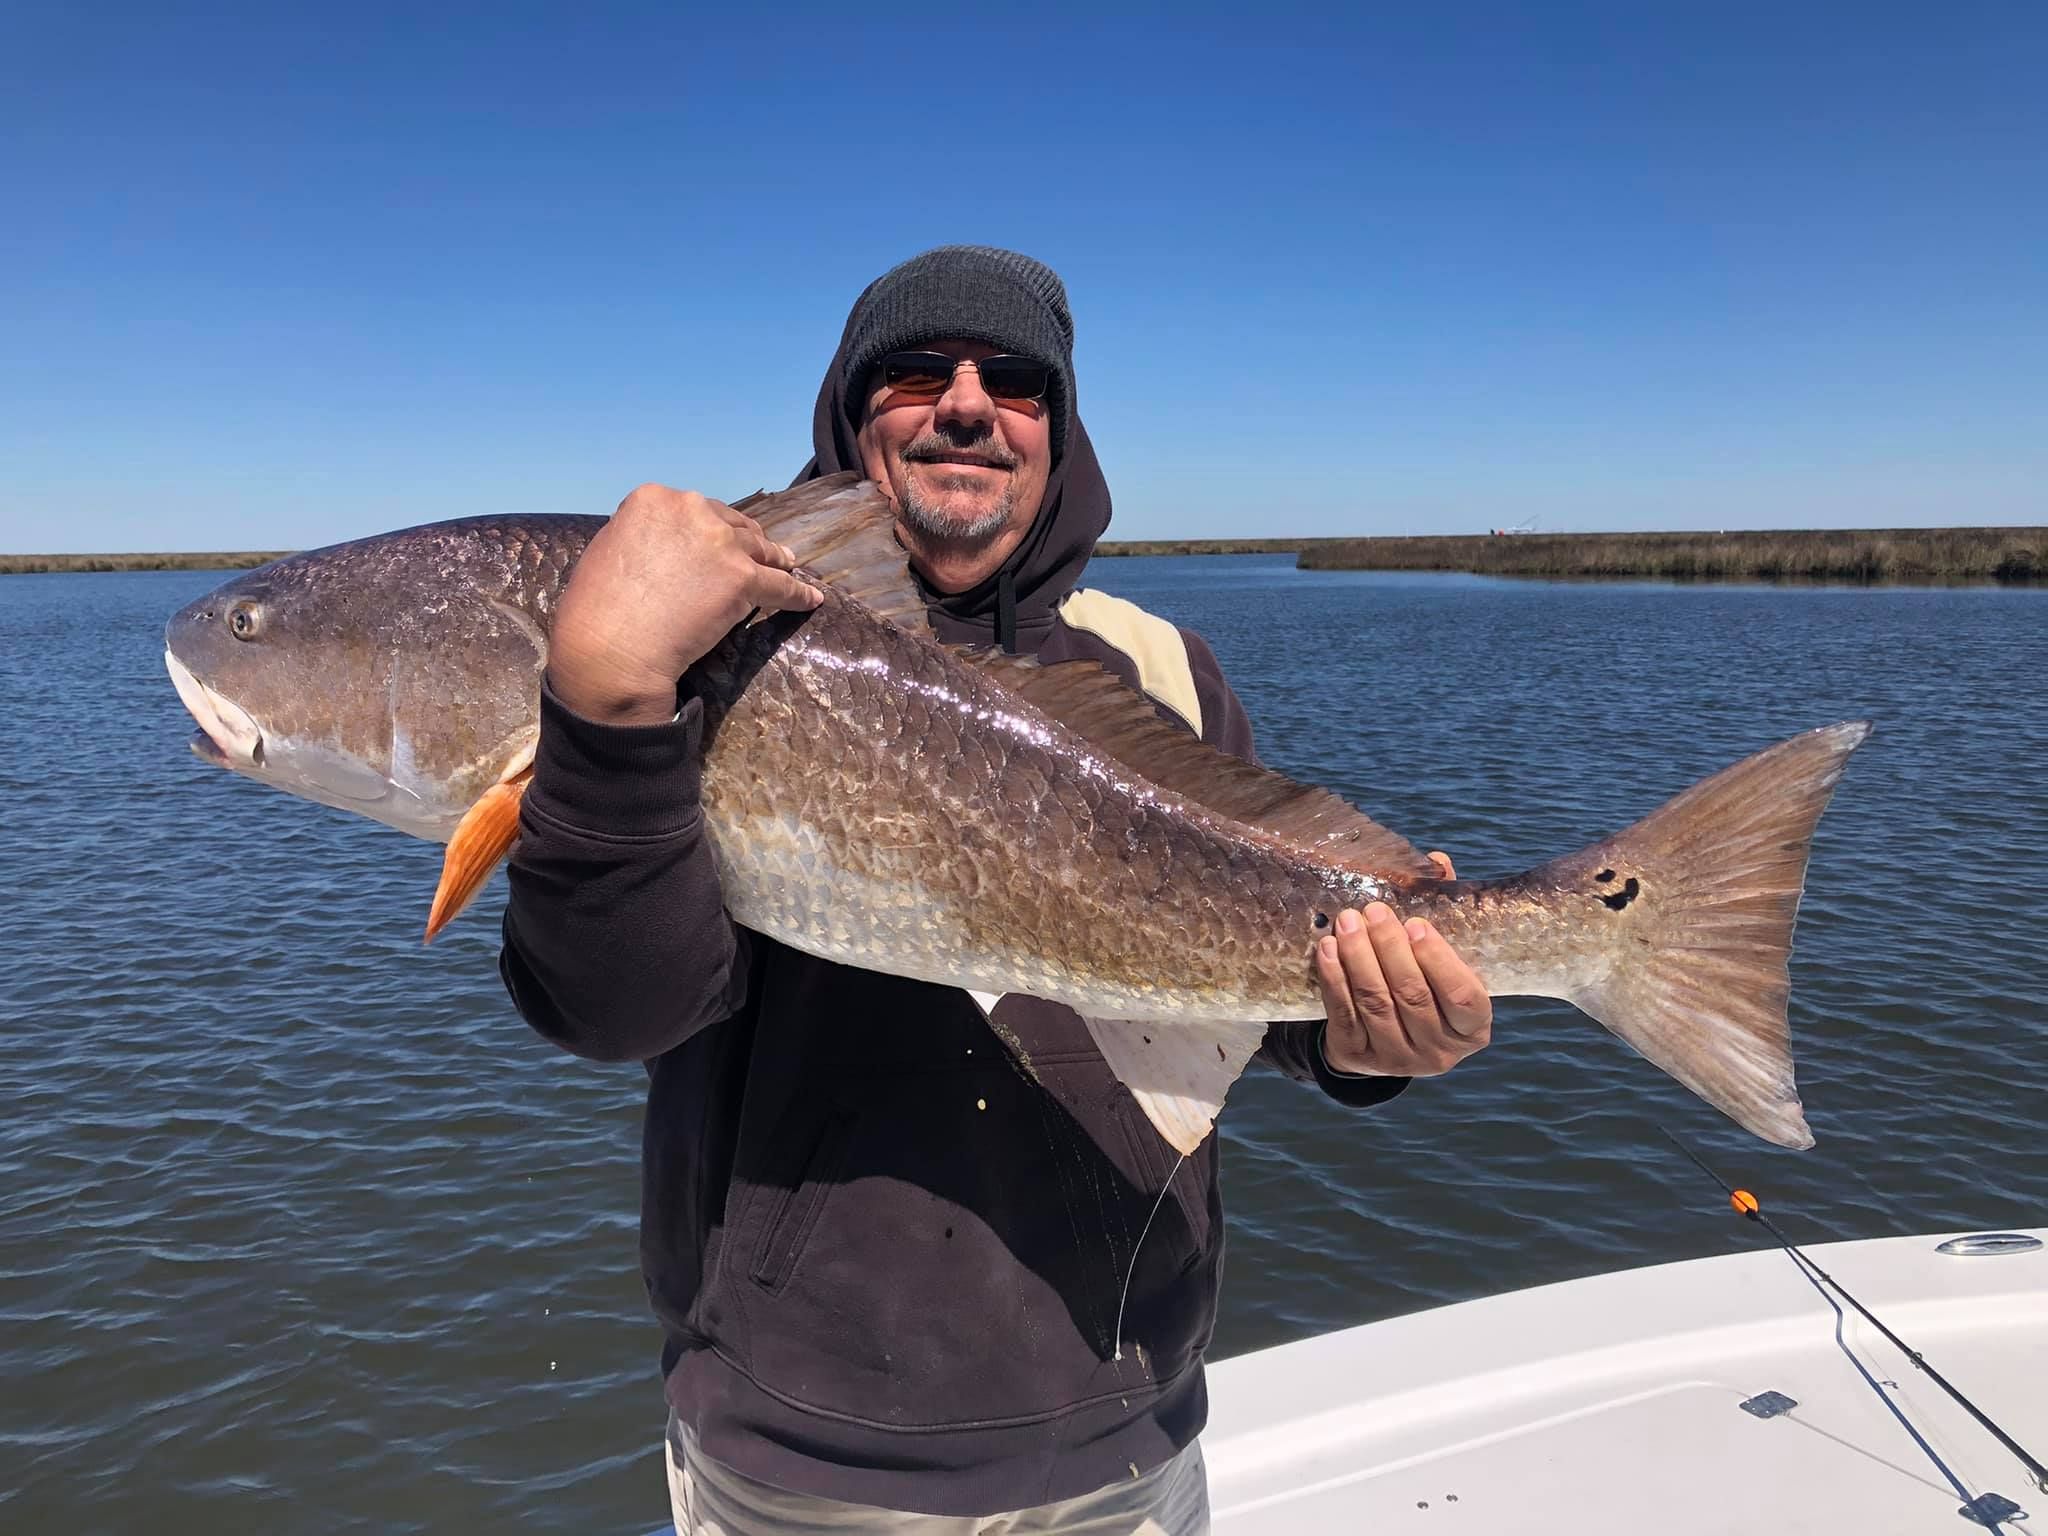 Trophy redfish from New Orleans, LA waters